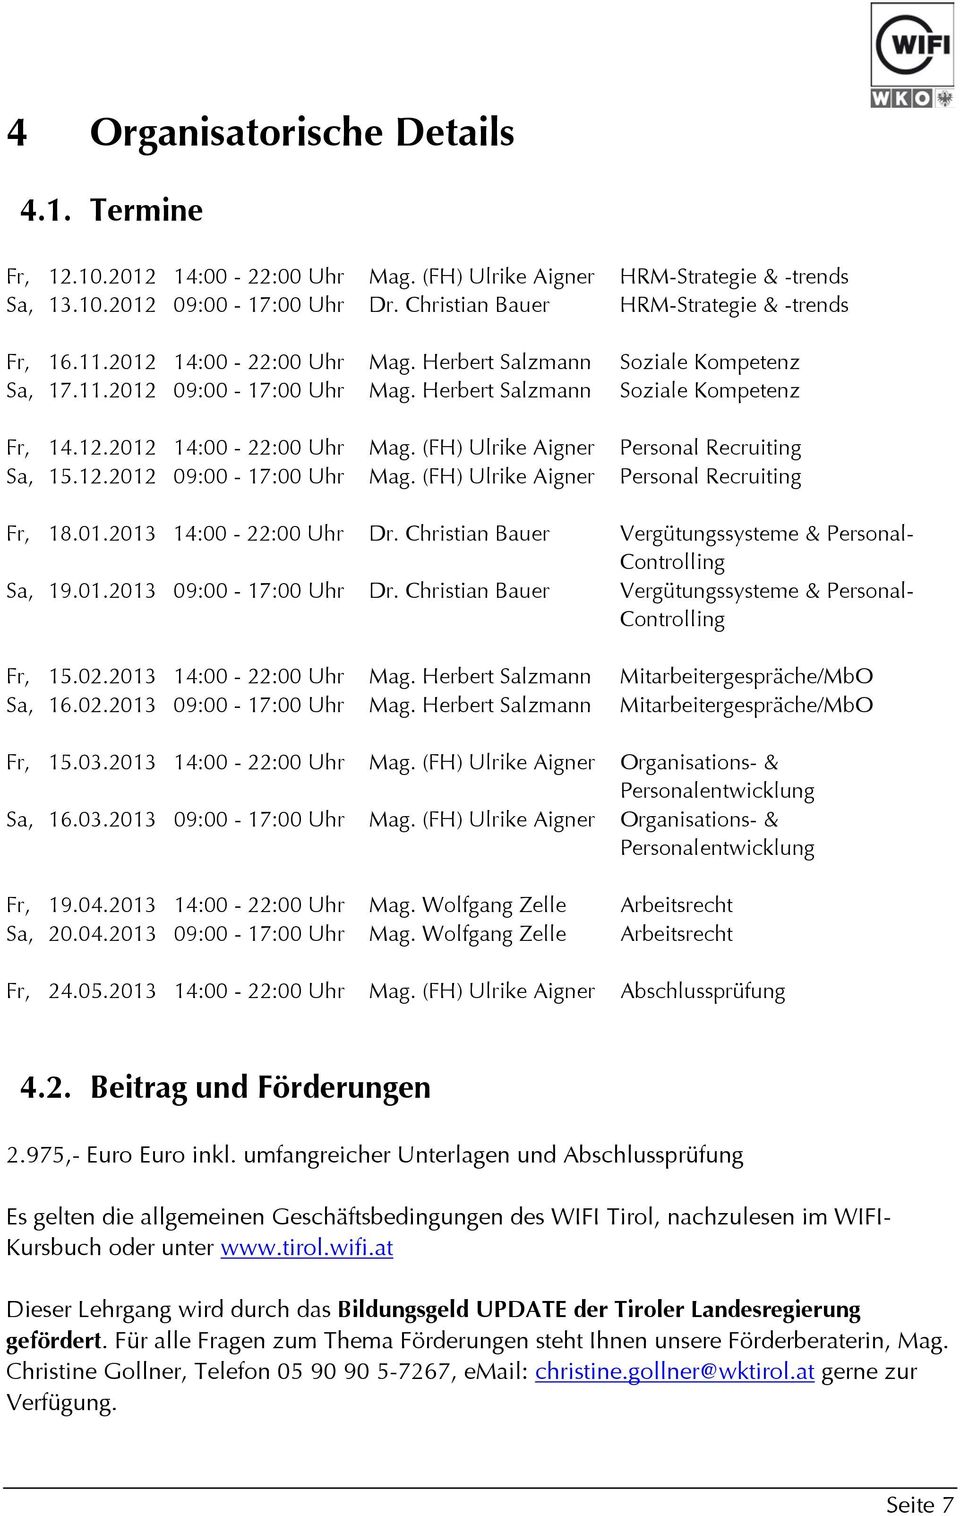 12.2012 09:00-17:00 Uhr Mag. (FH) Ulrike Aigner Personal Recruiting Fr, 18.01.2013 14:00-22:00 Uhr Dr. Christian Bauer Vergütungssysteme & Personal- Controlling Sa, 19.01.2013 09:00-17:00 Uhr Dr.